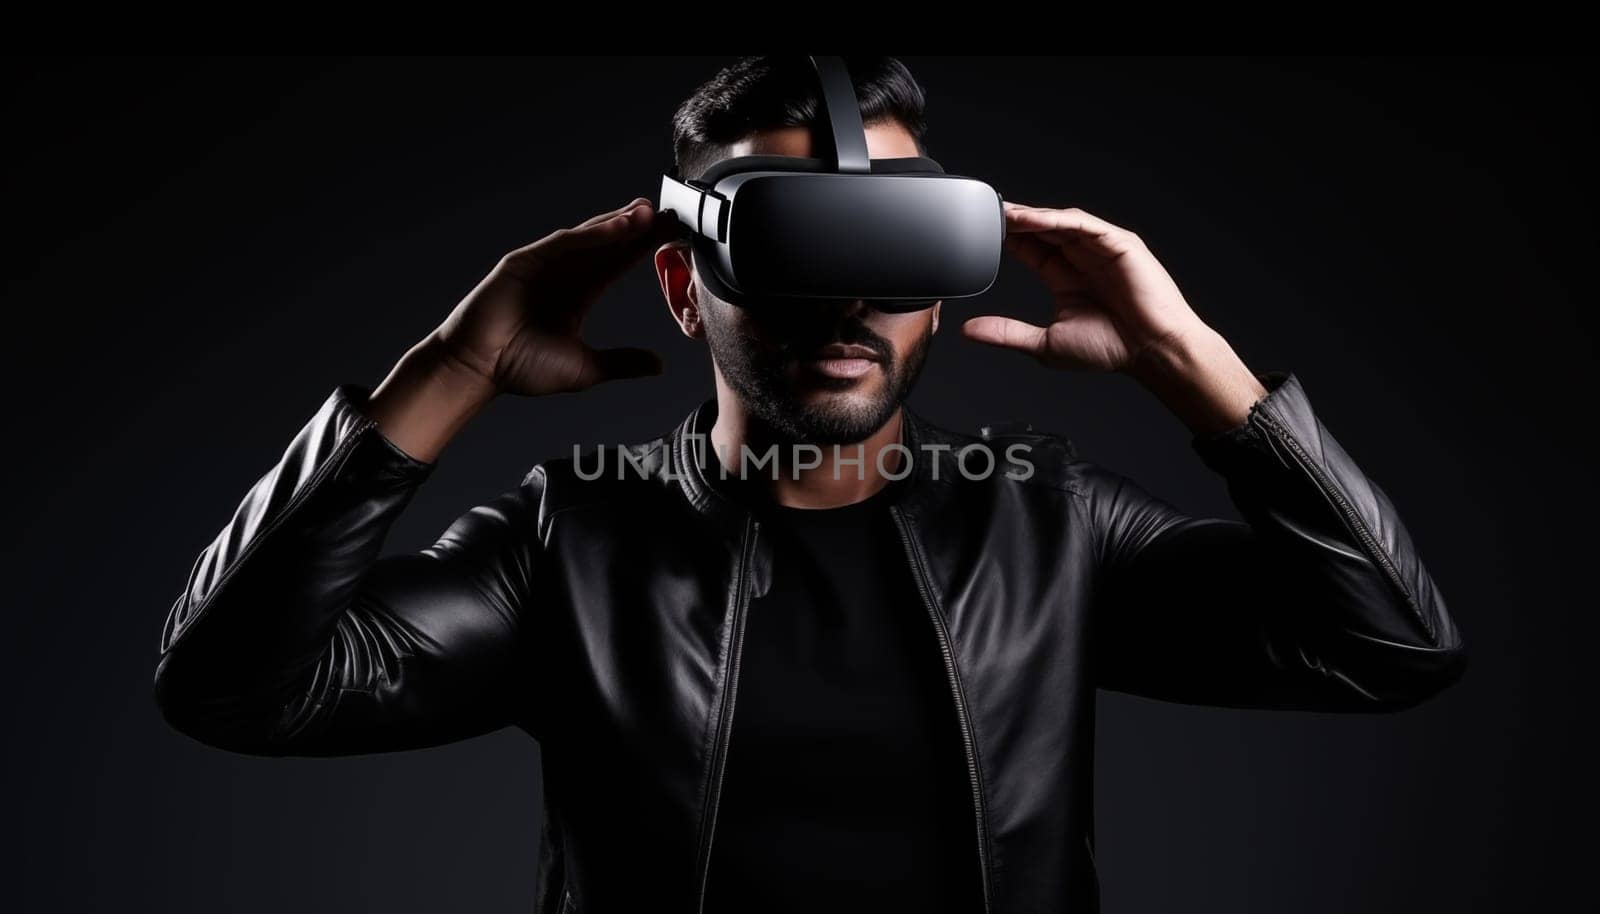 Man in VR glasses. High quality photo